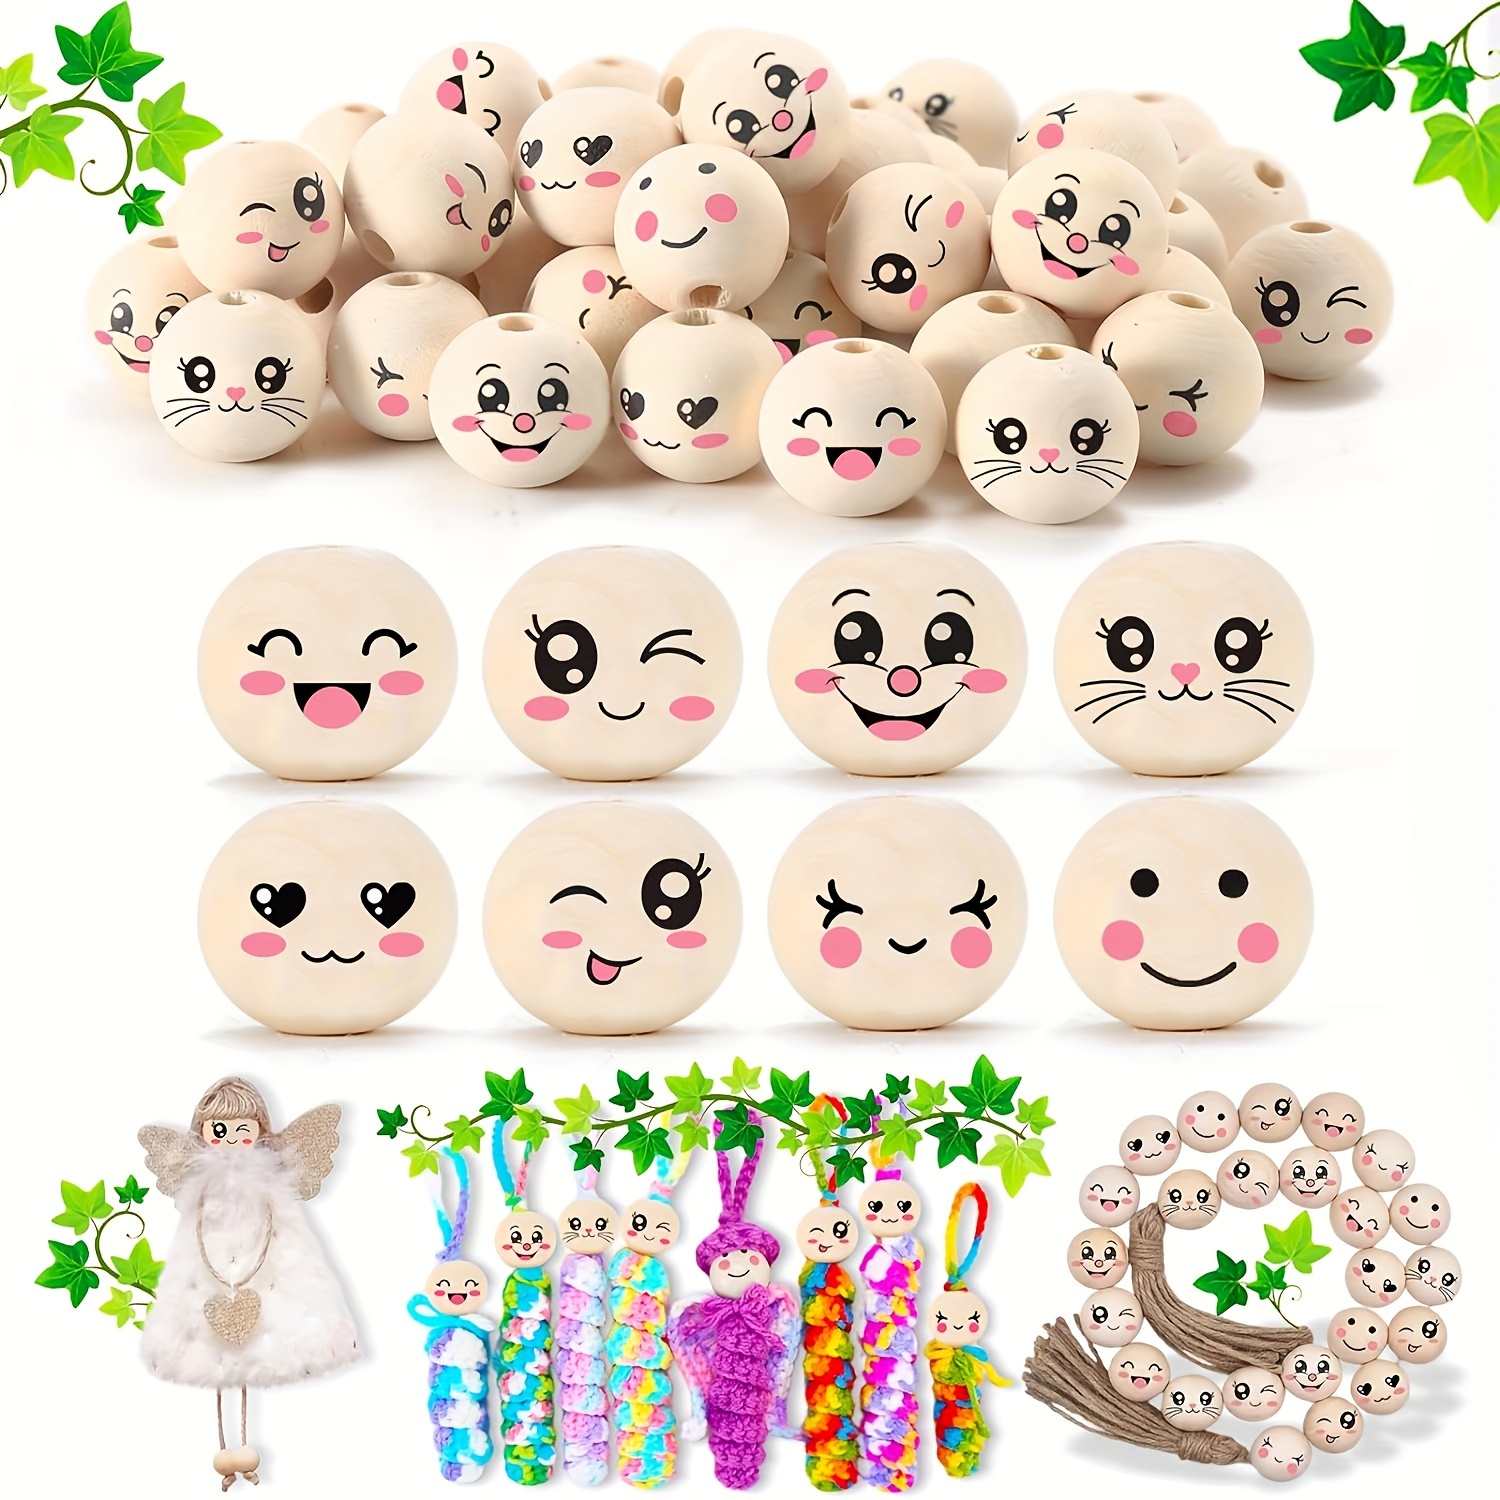 

40pcs Cute Expression Pattern Wooden Beads, 20mm/0.78in With Hole, Diy Crafting Crochet Craft Keychain Supplies, 8 Styles Smile Face Patterns For Jewelry Making